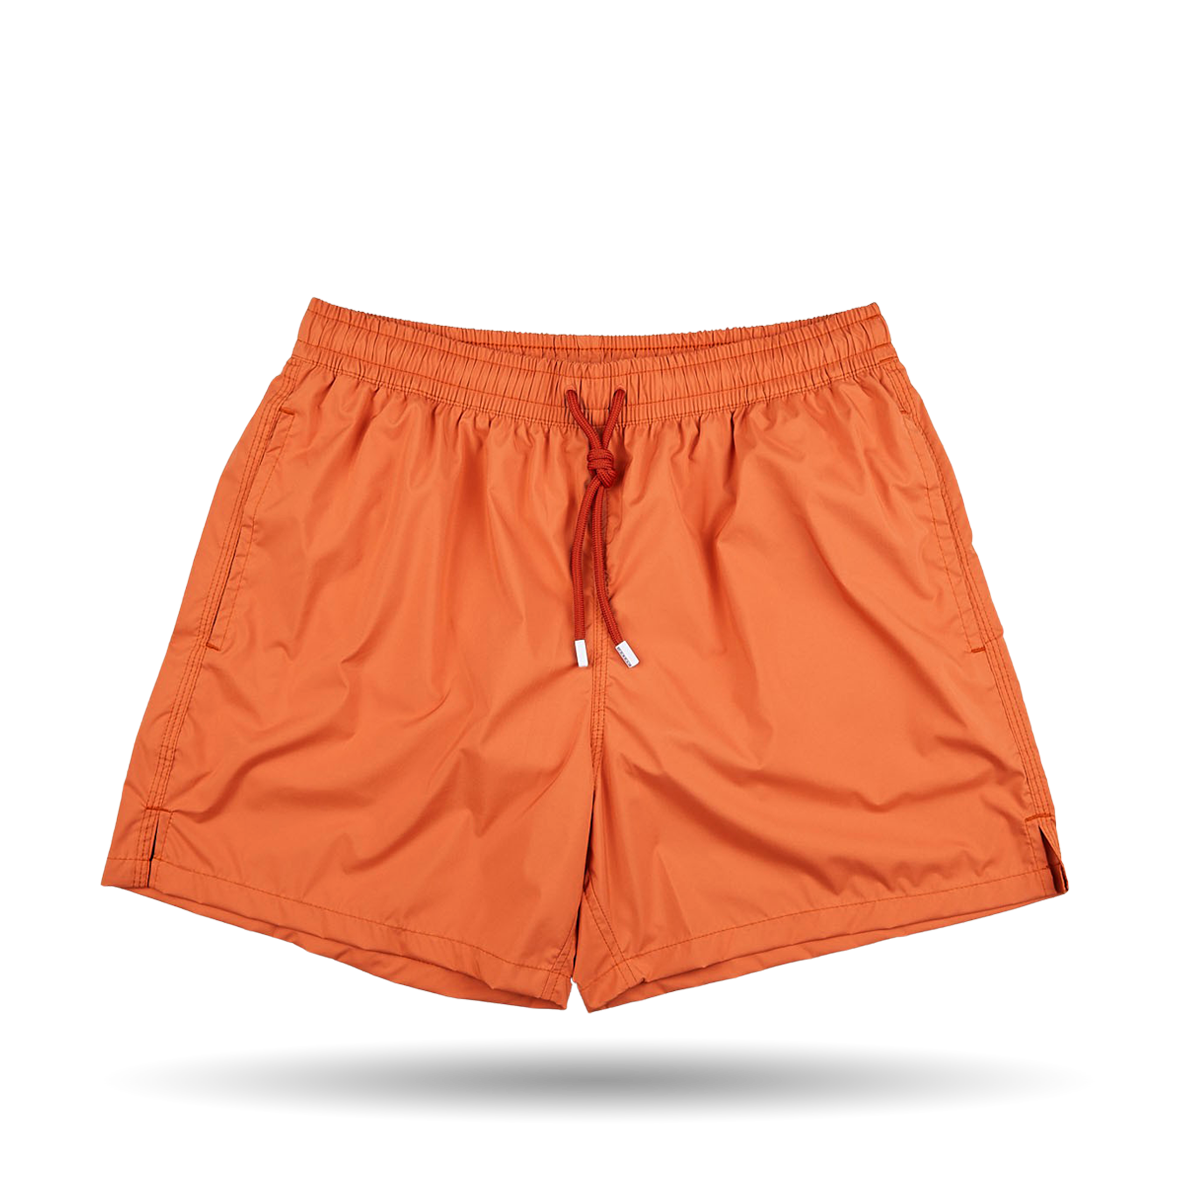 The Fedeli Rust Brown Microfiber Madeira Swim Shorts with a mesh lining.